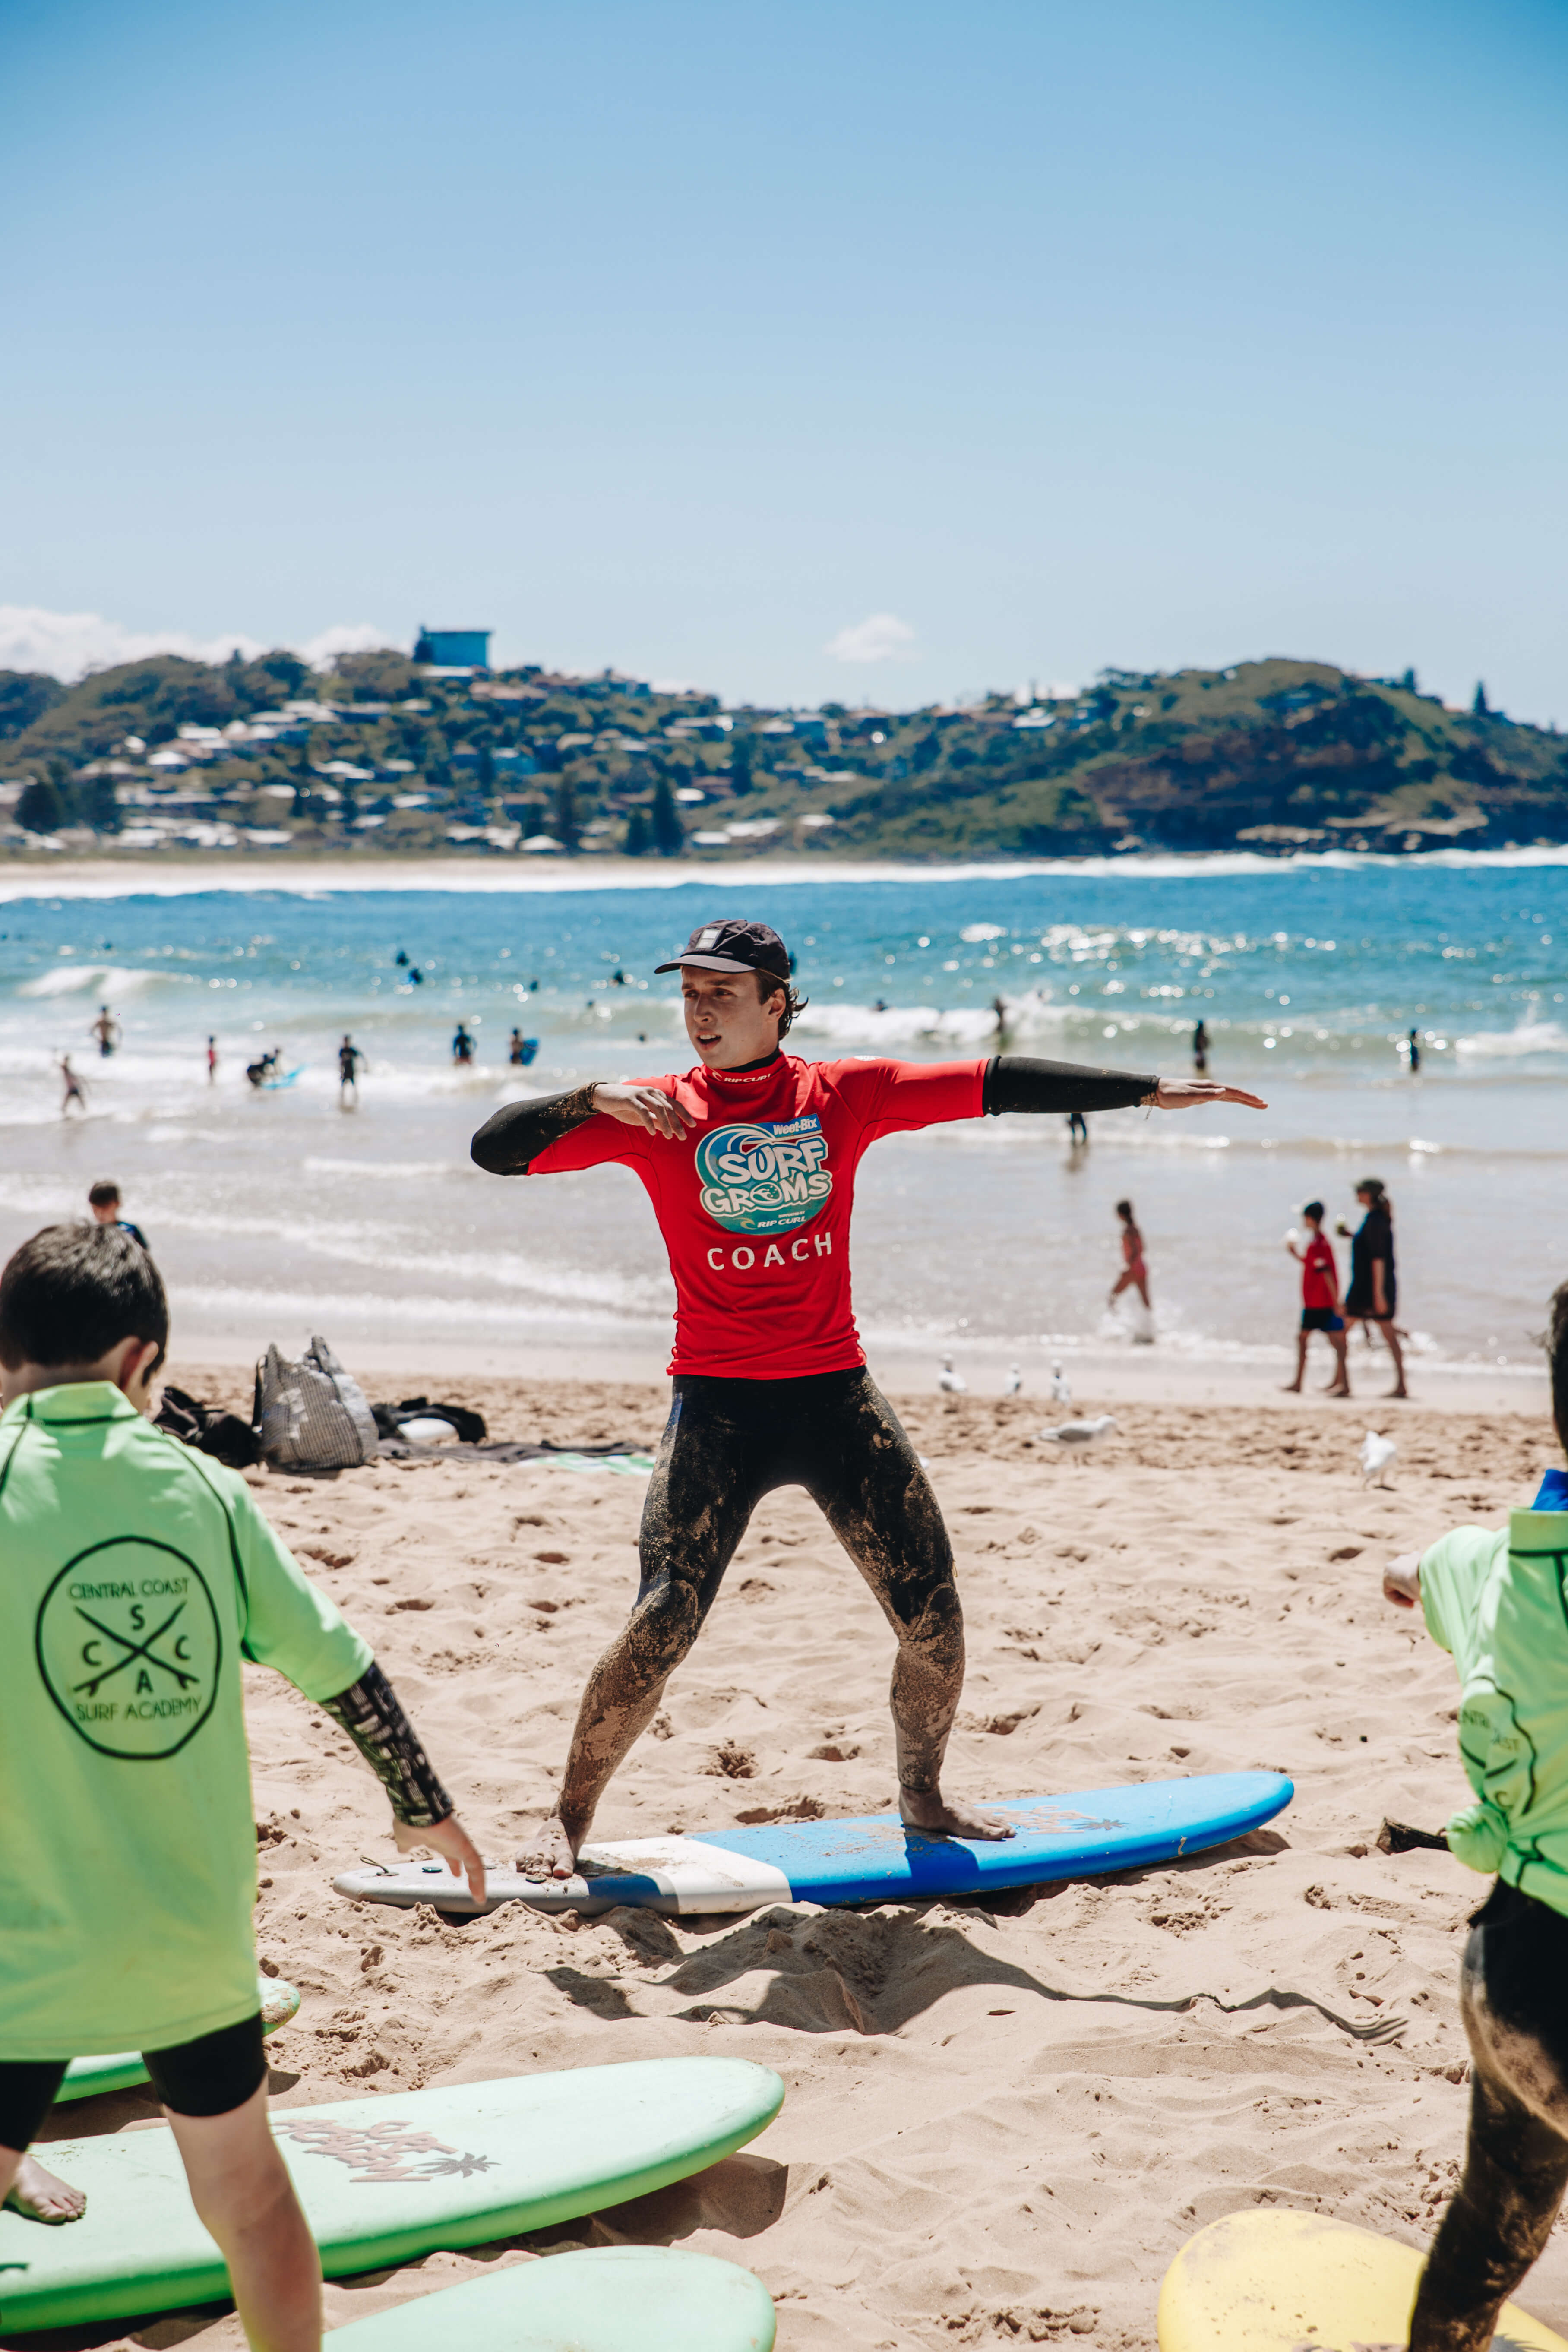 Central Coast Surf Academy in action